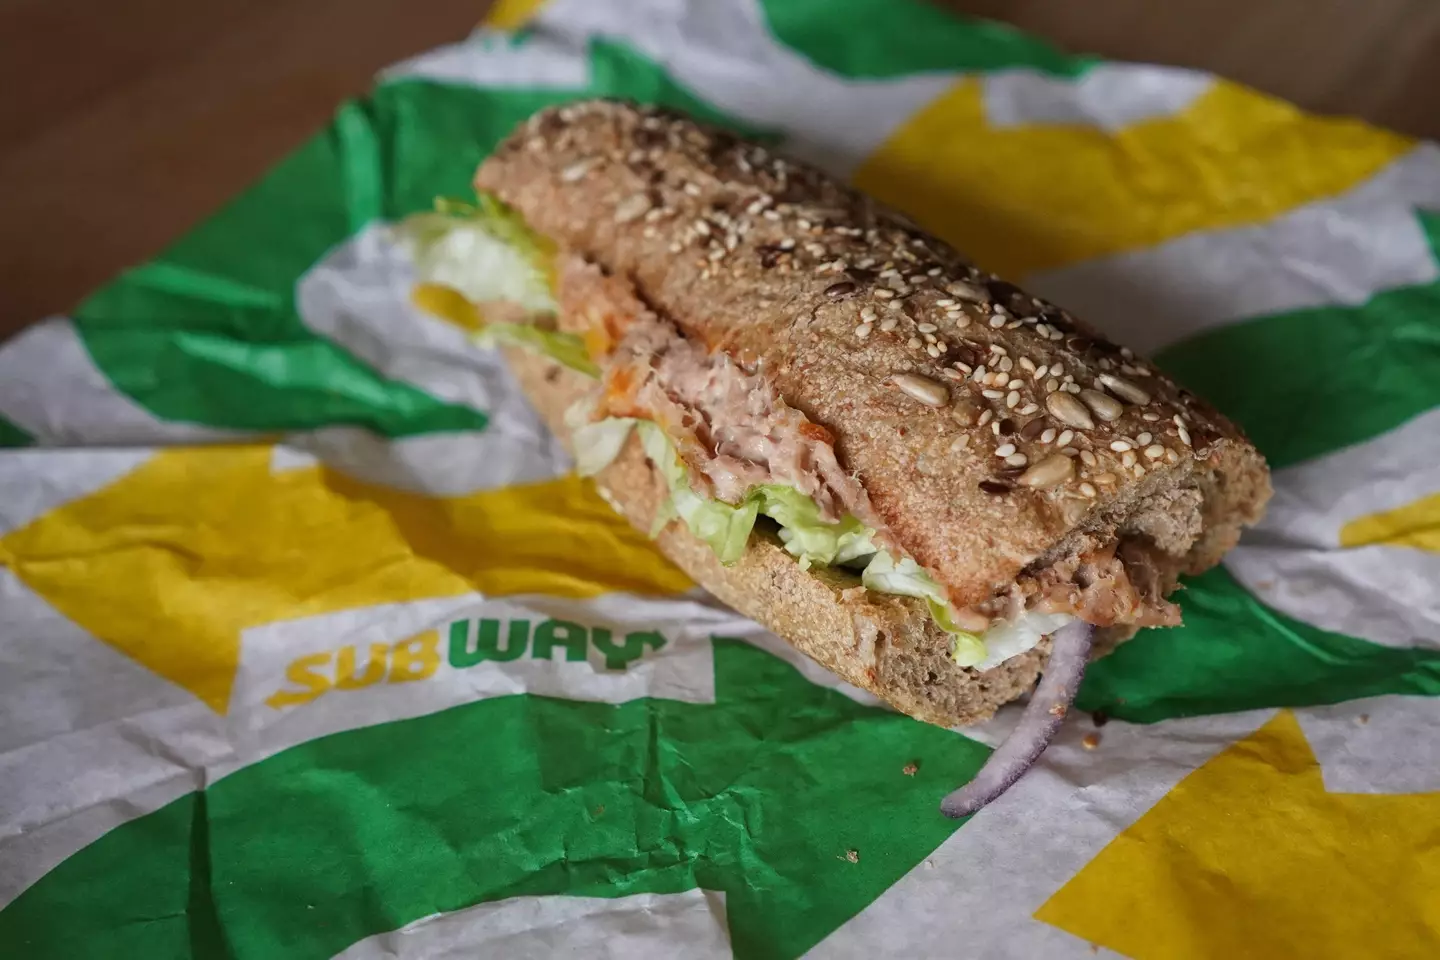 A judge has ruled a lawsuit surrounding Subway's tuna sandwiches can go ahead.